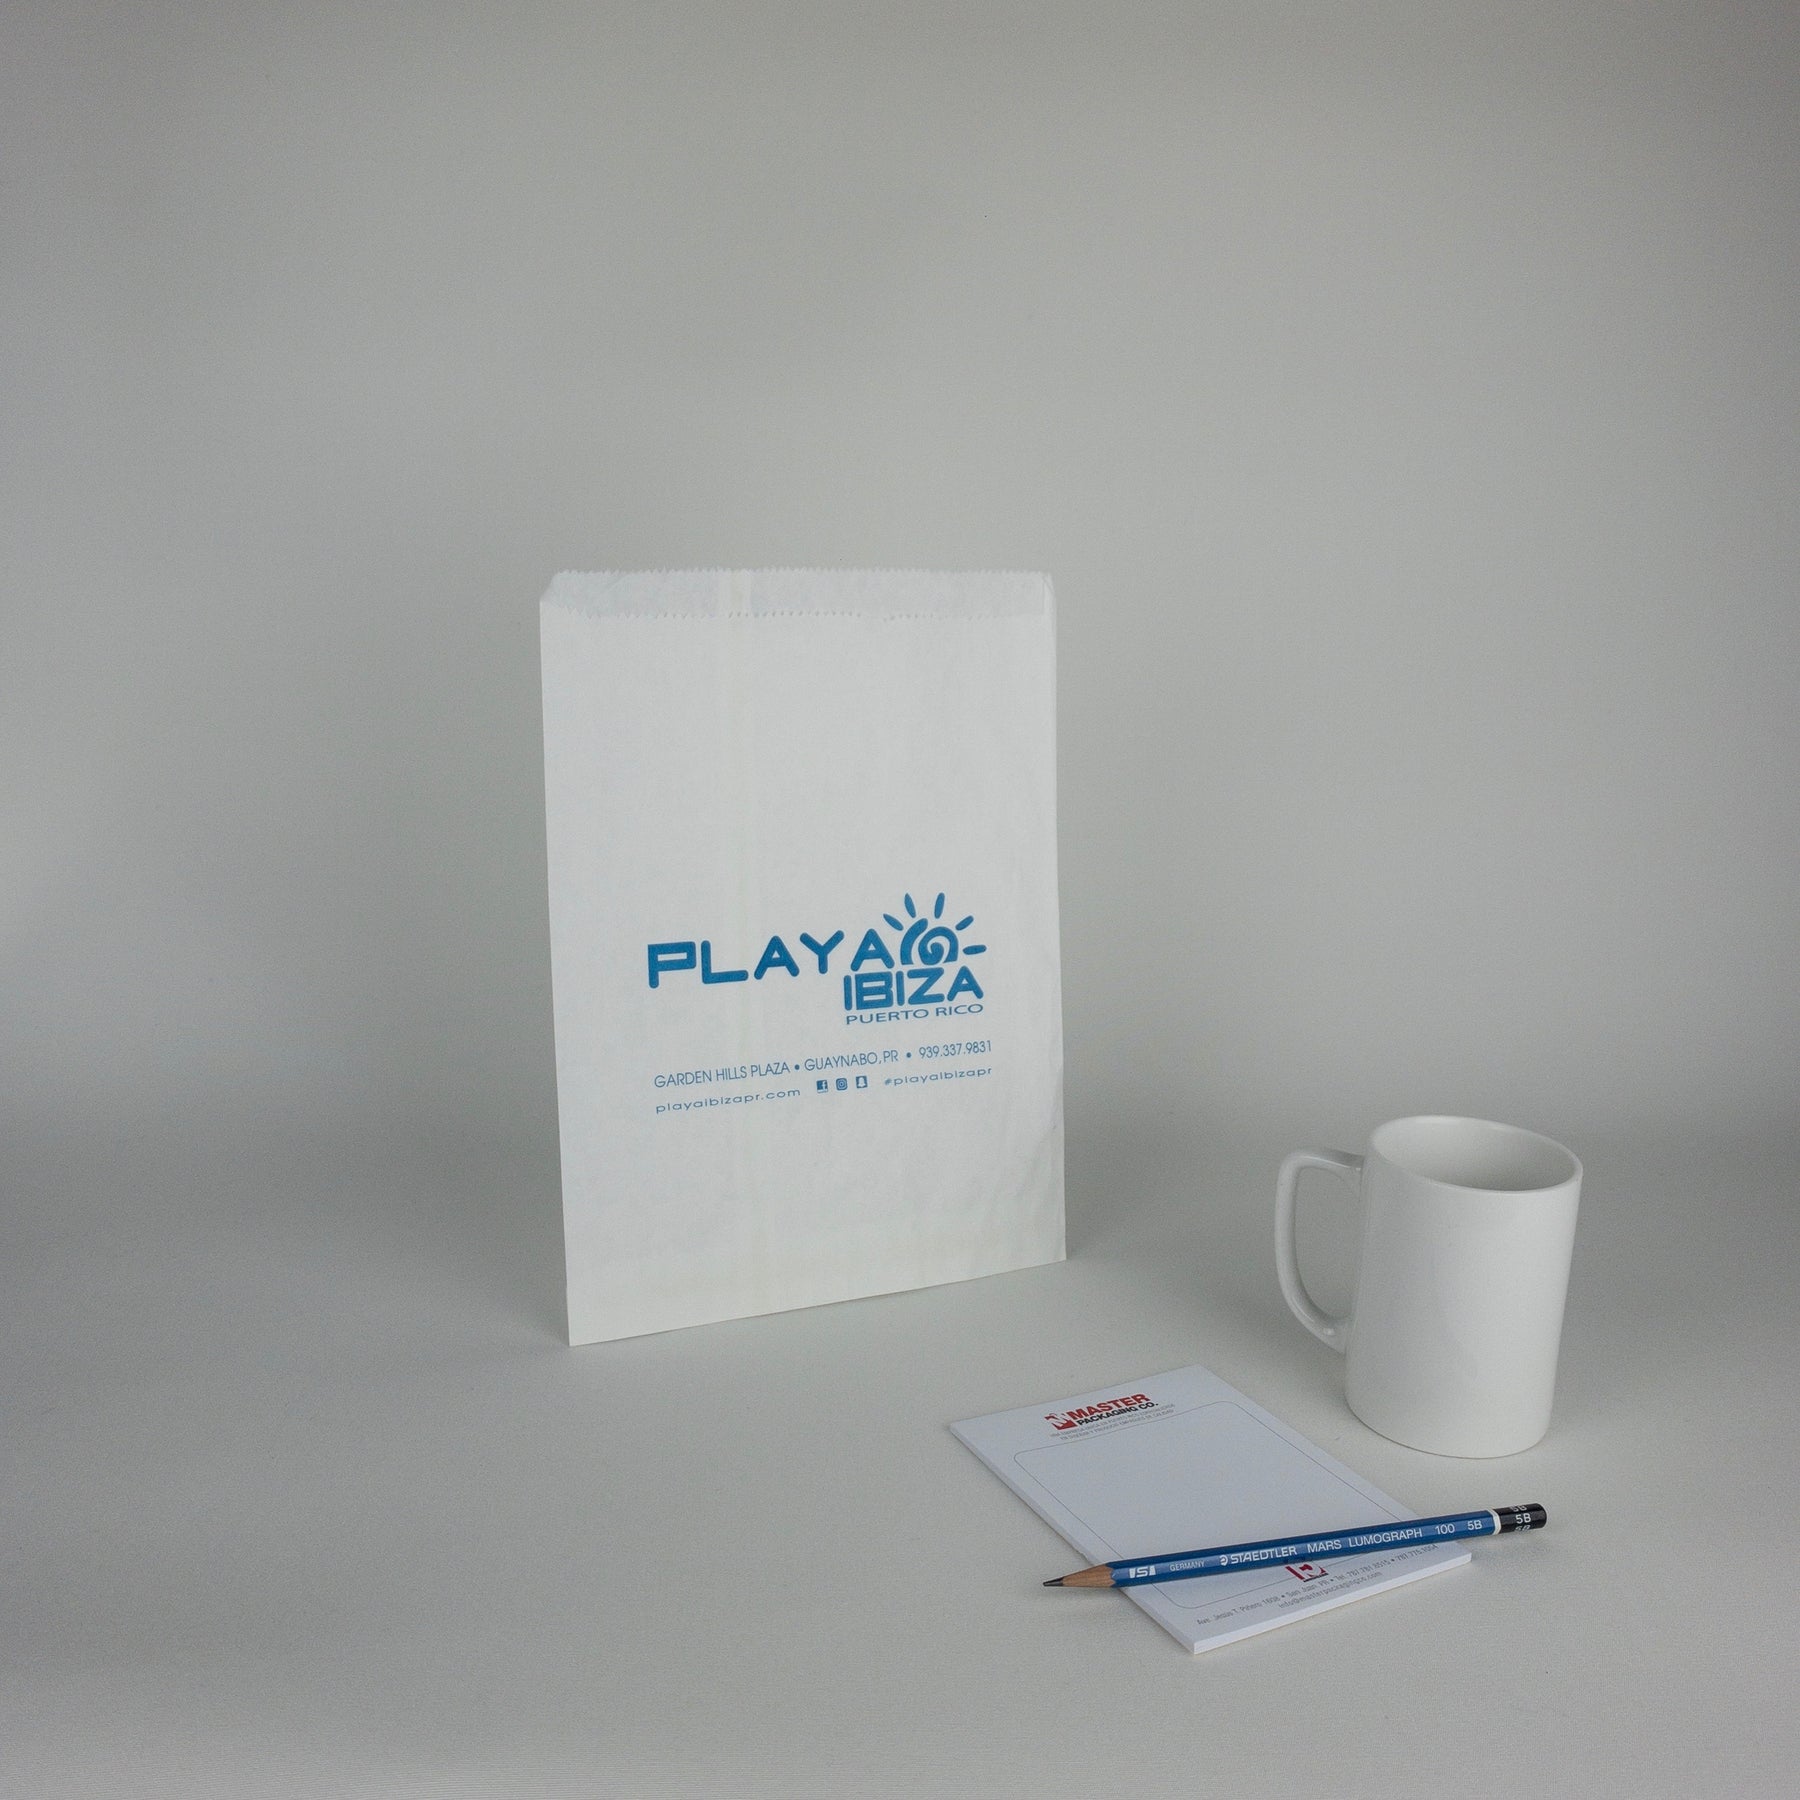 8.5x11 Recycled White Paper Merchandise Bags